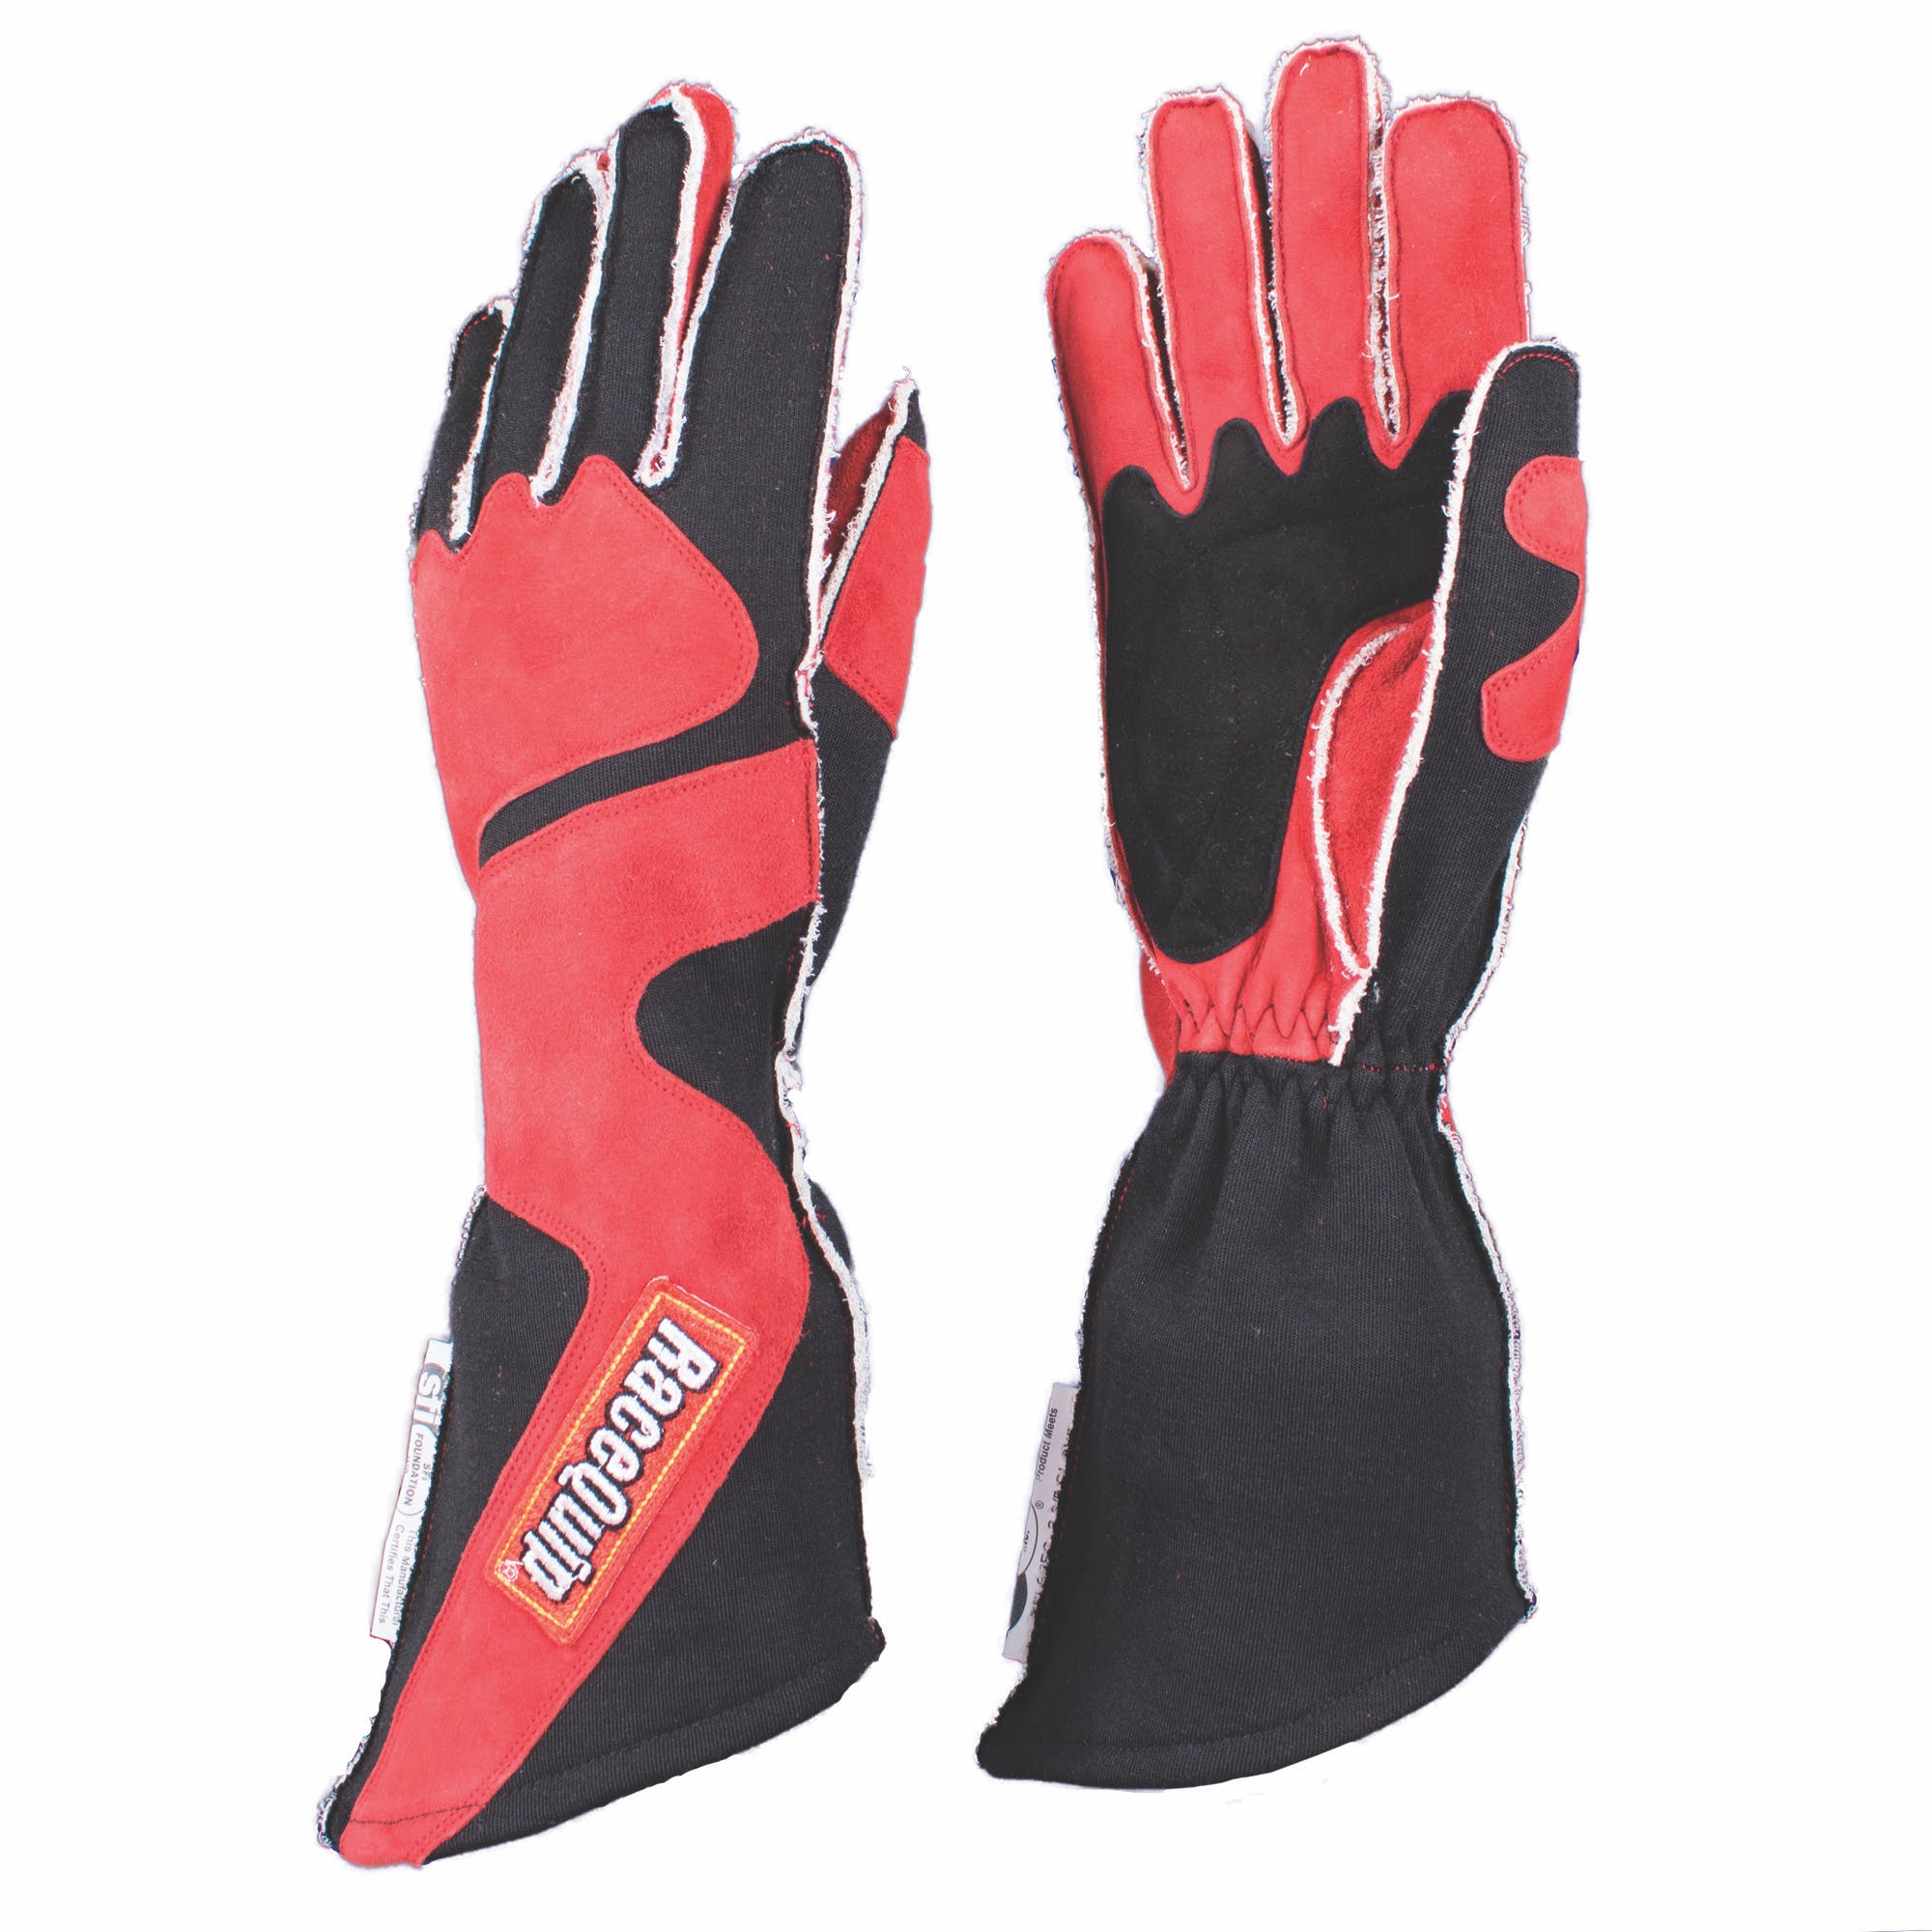 RaceQuip 359107 SFI-5 Out Seam Angle-Cut Gauntlet Racing Gloves (Red/Black, XX-Large)